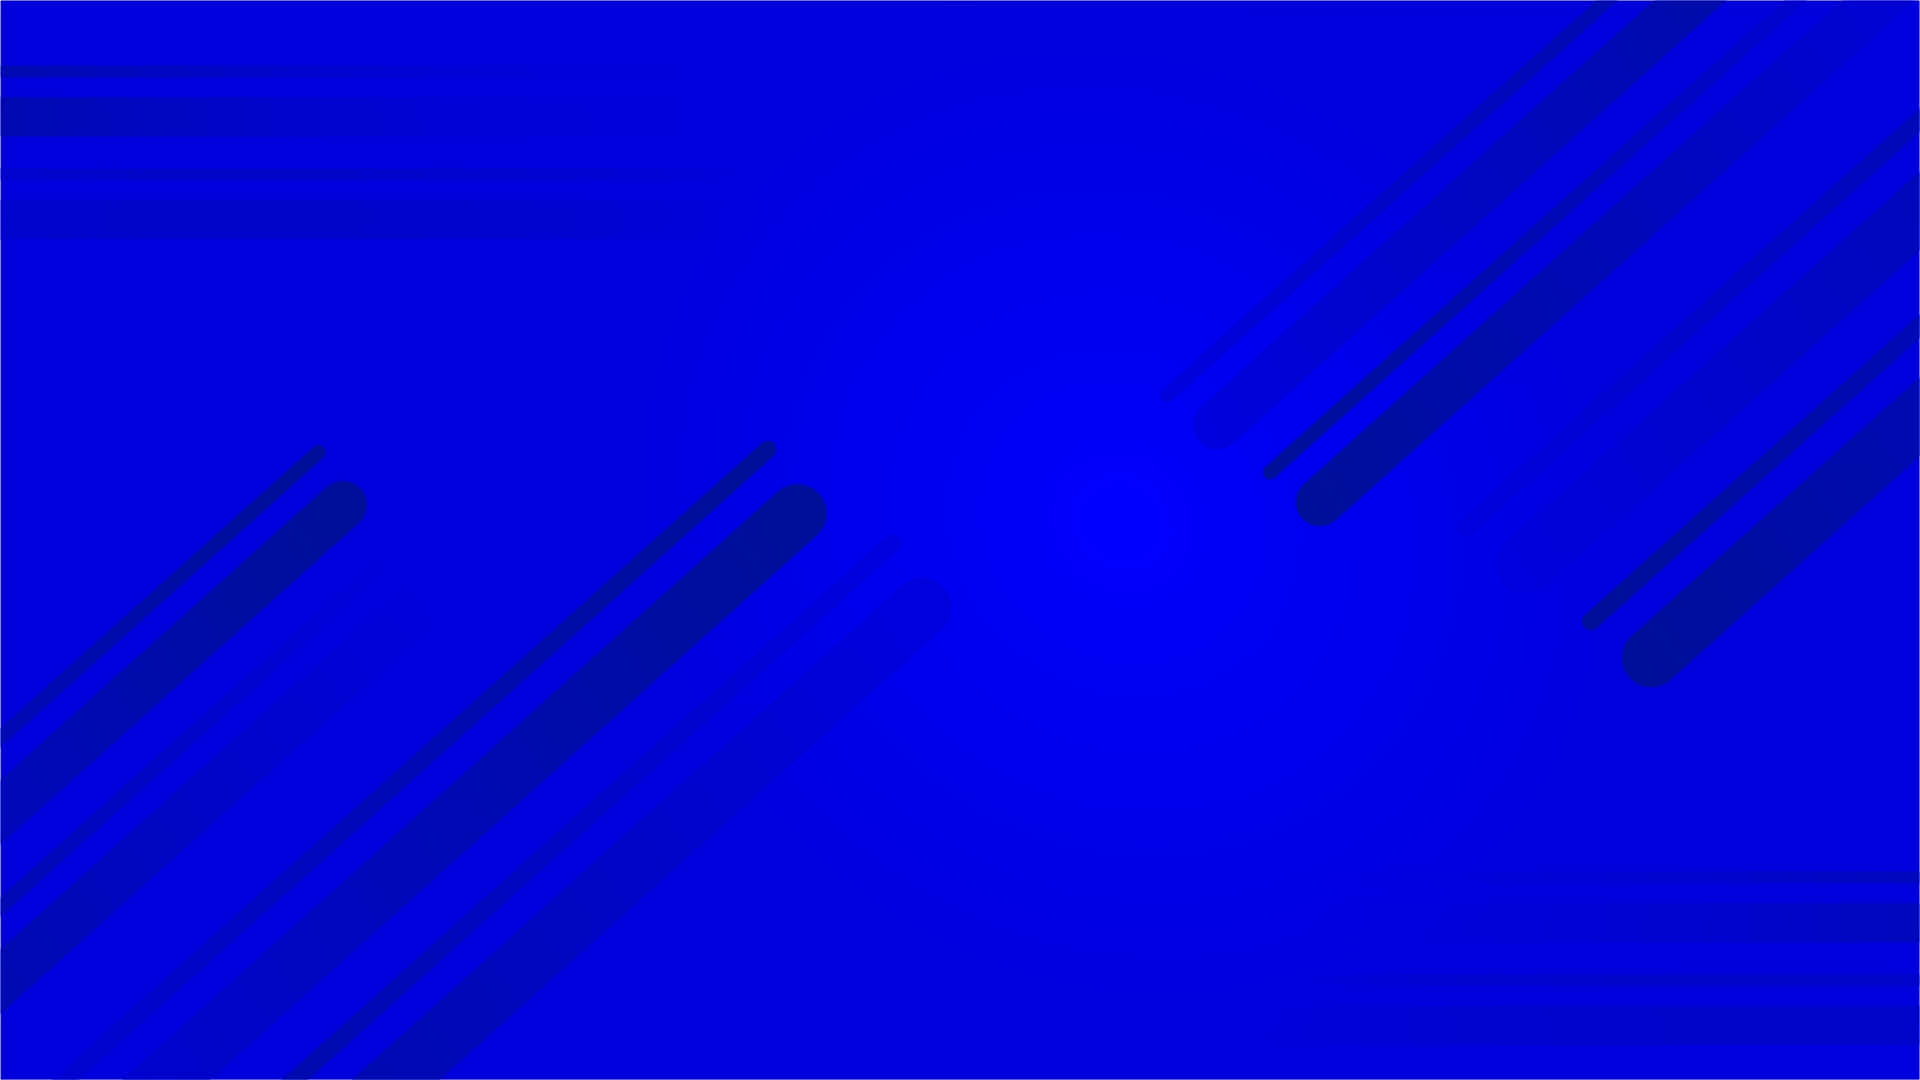 Solid Blue With Abstract Lines Background